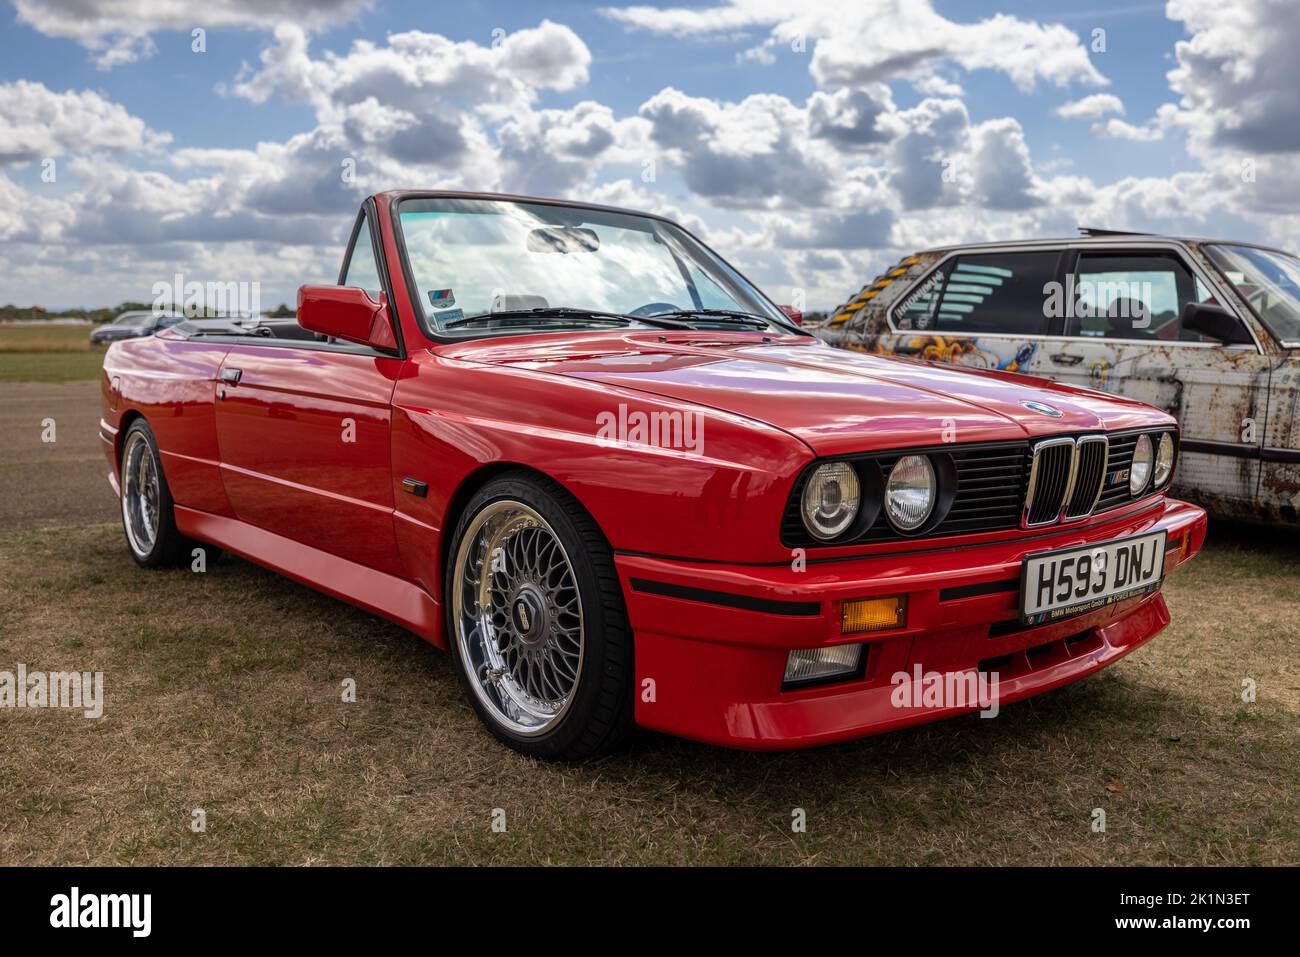 1991 BMW M3 Convertible’H593 DNJ’  on display at the Bicester Heritage Scramble celebrating 50 years of BMW M Stock Photo